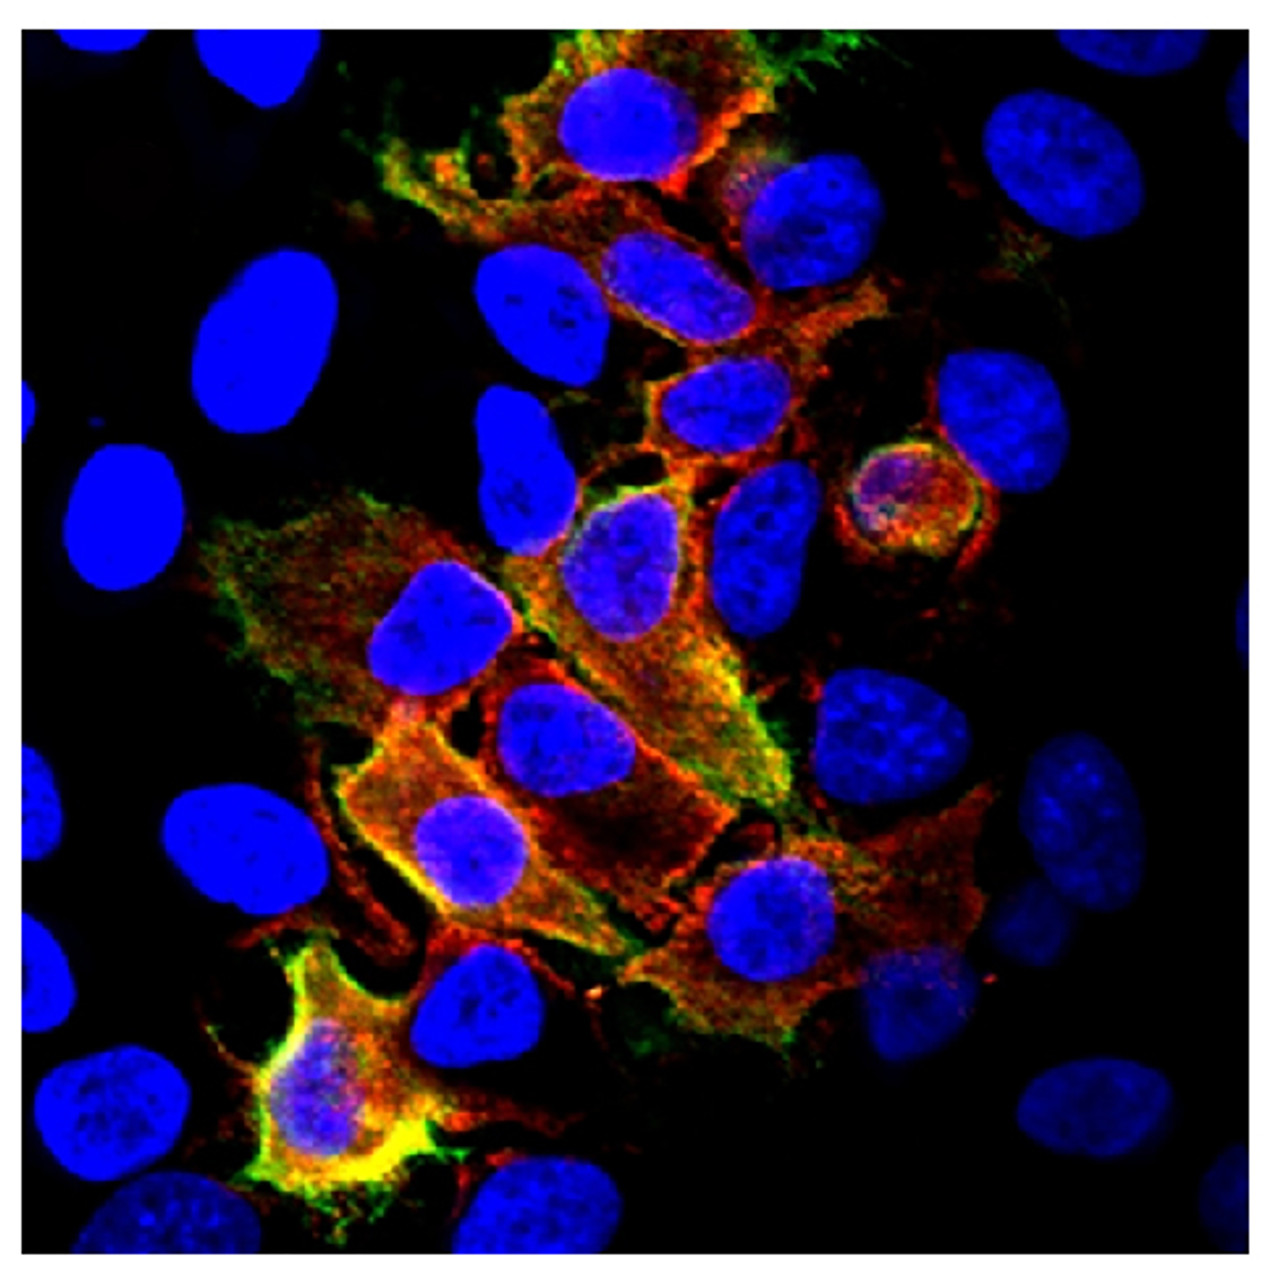 HeLa cells transfected with FLAG tagged porcine CD4.A vector were stained with Mouse Anti-Porcine CD4-PE (Cat. No. 99-145) and anti-FLAG followed by a secondary antibody and Hoechst 33342.

Image from Matsubara T, Nishii N, Takashima S, Takasu M, Imaeda N, Aiki-Oshimo K, et al. Identification and characterization of two CD4 alleles in Microminipigs. BMC Vet Res. 2016;12:222. Figure 6 (c)